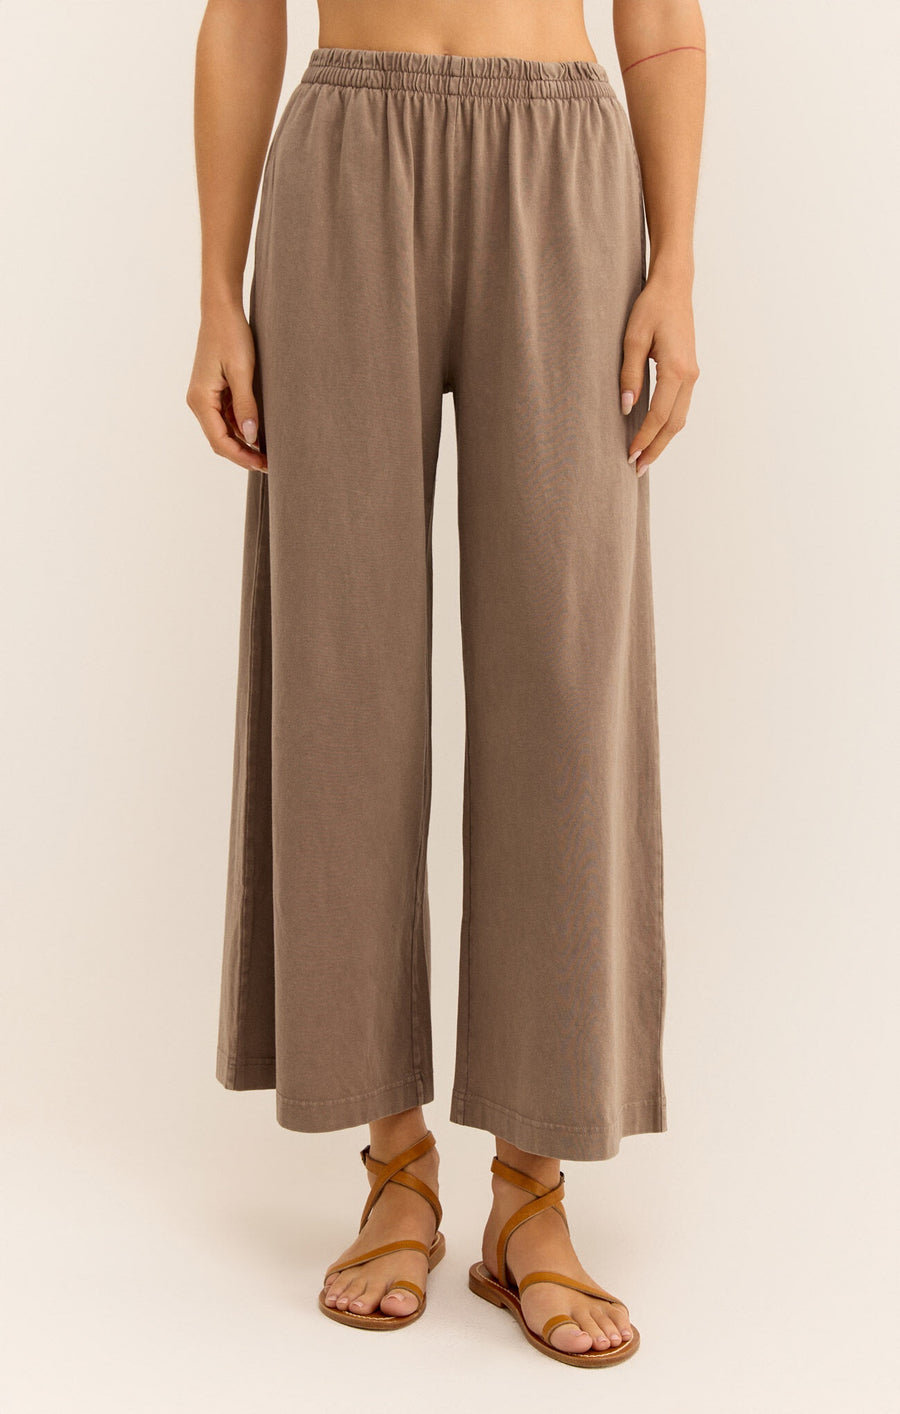 Featuring an elastic high waisted crop pant in the color iced coffee